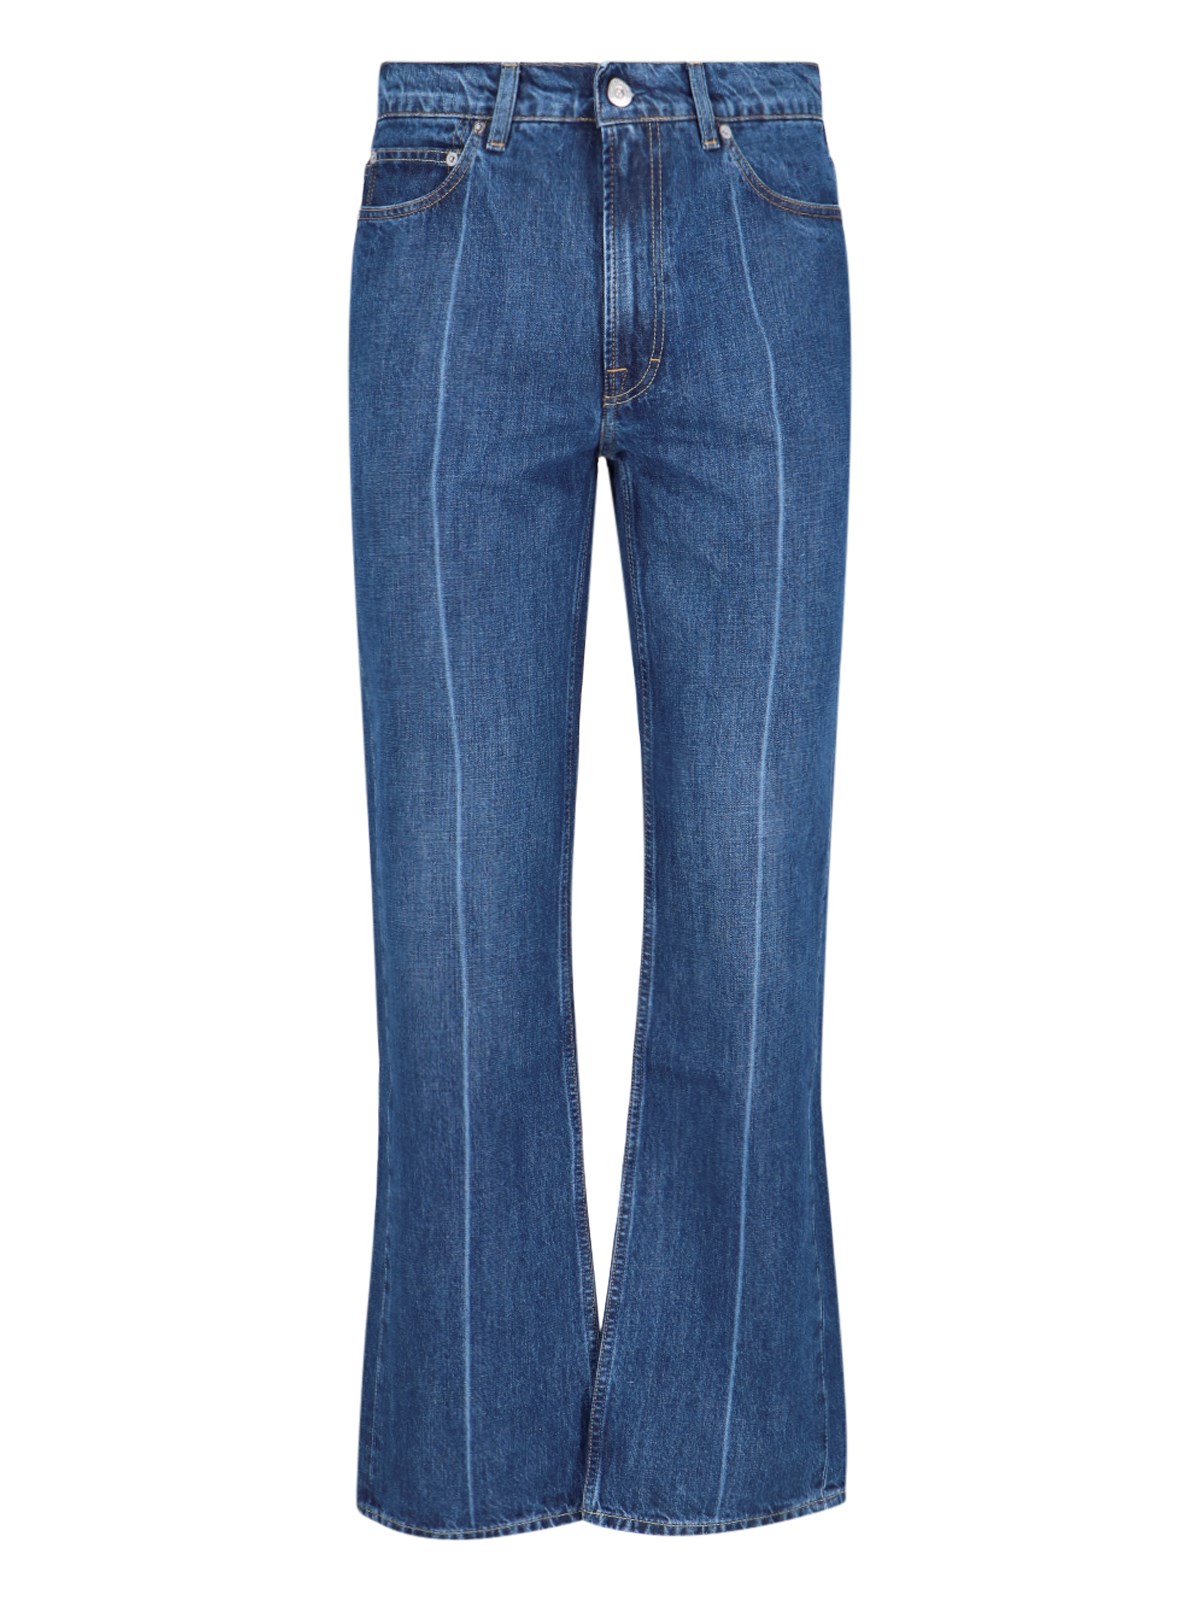 OUR LEGACY "70S CUT" JEANS